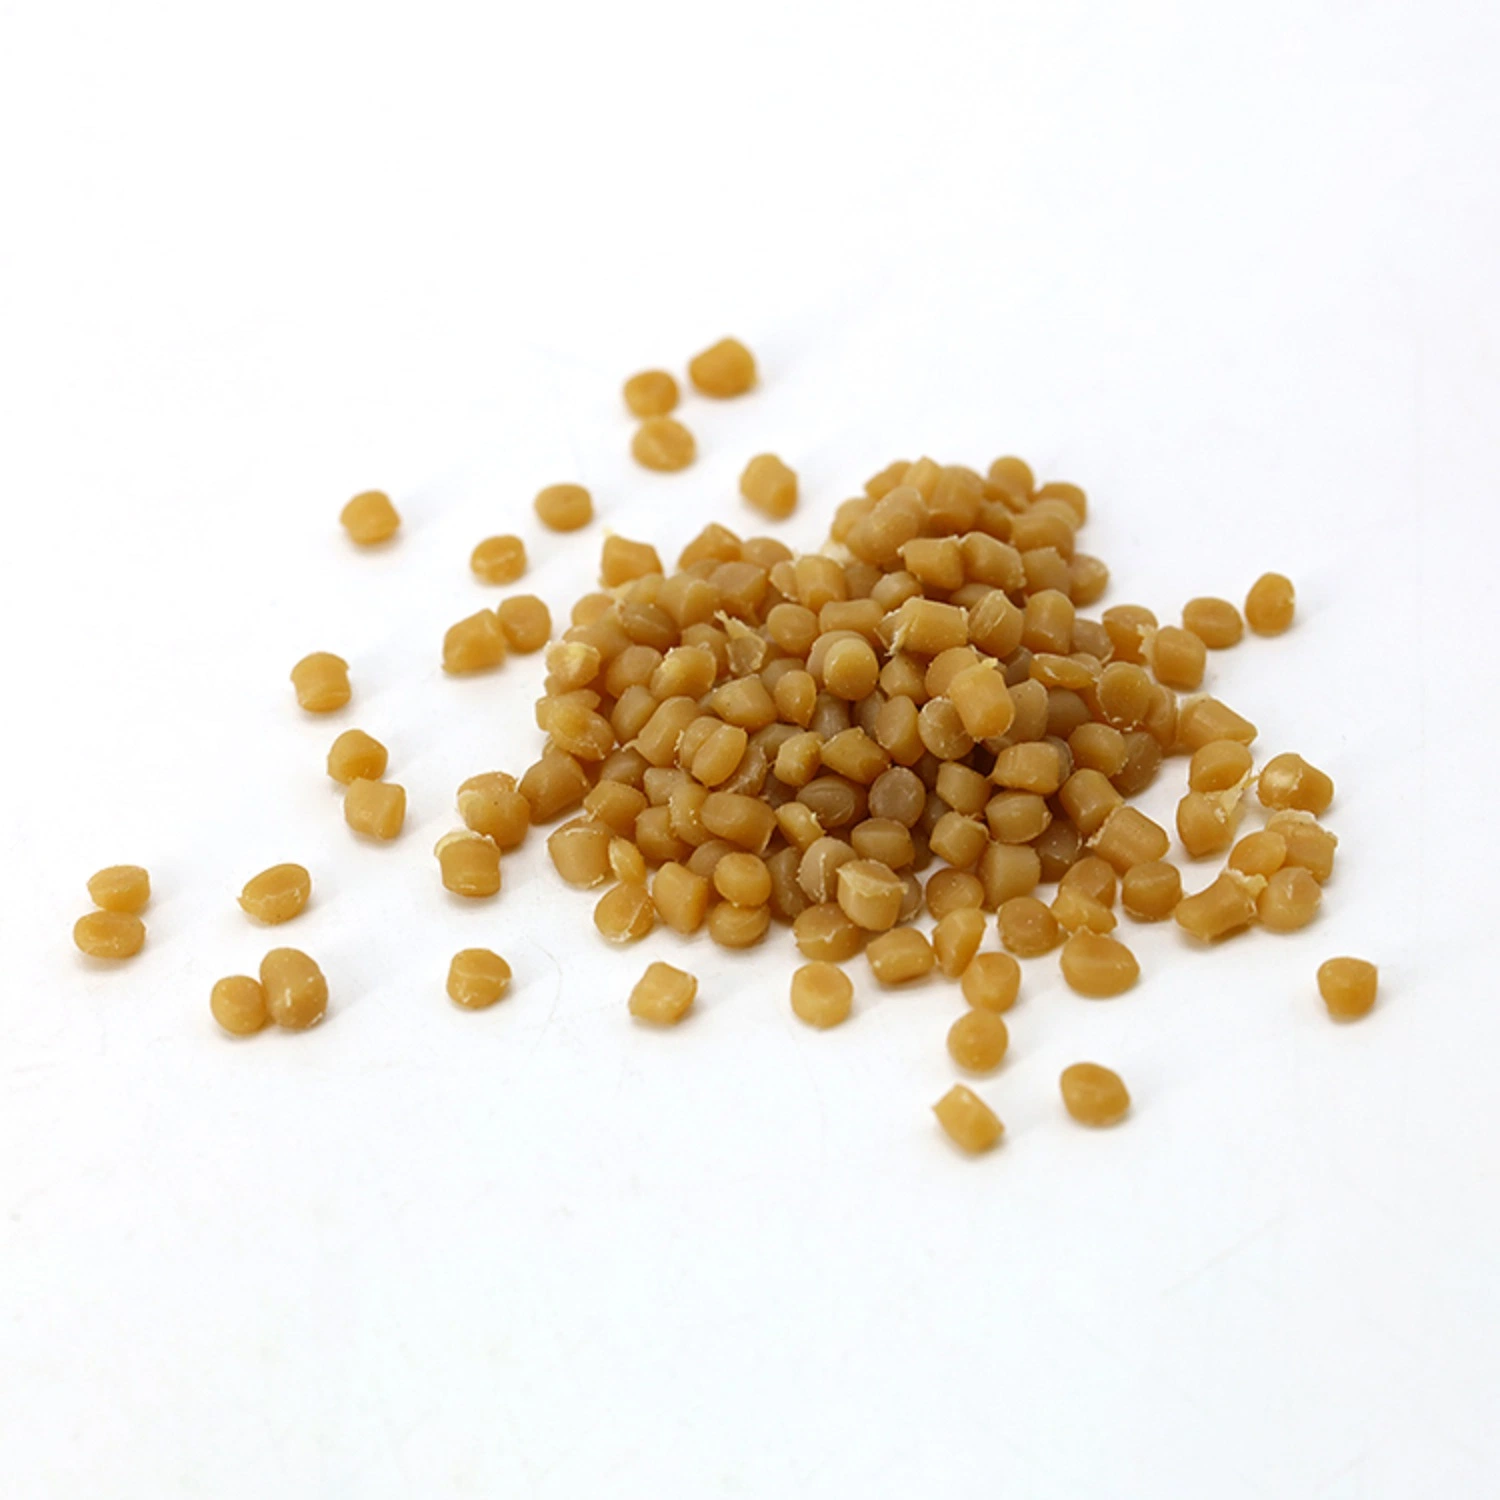 Manufacture Injection Honey Rubber Raw TPR Master Black Granules Material Thermoplastic